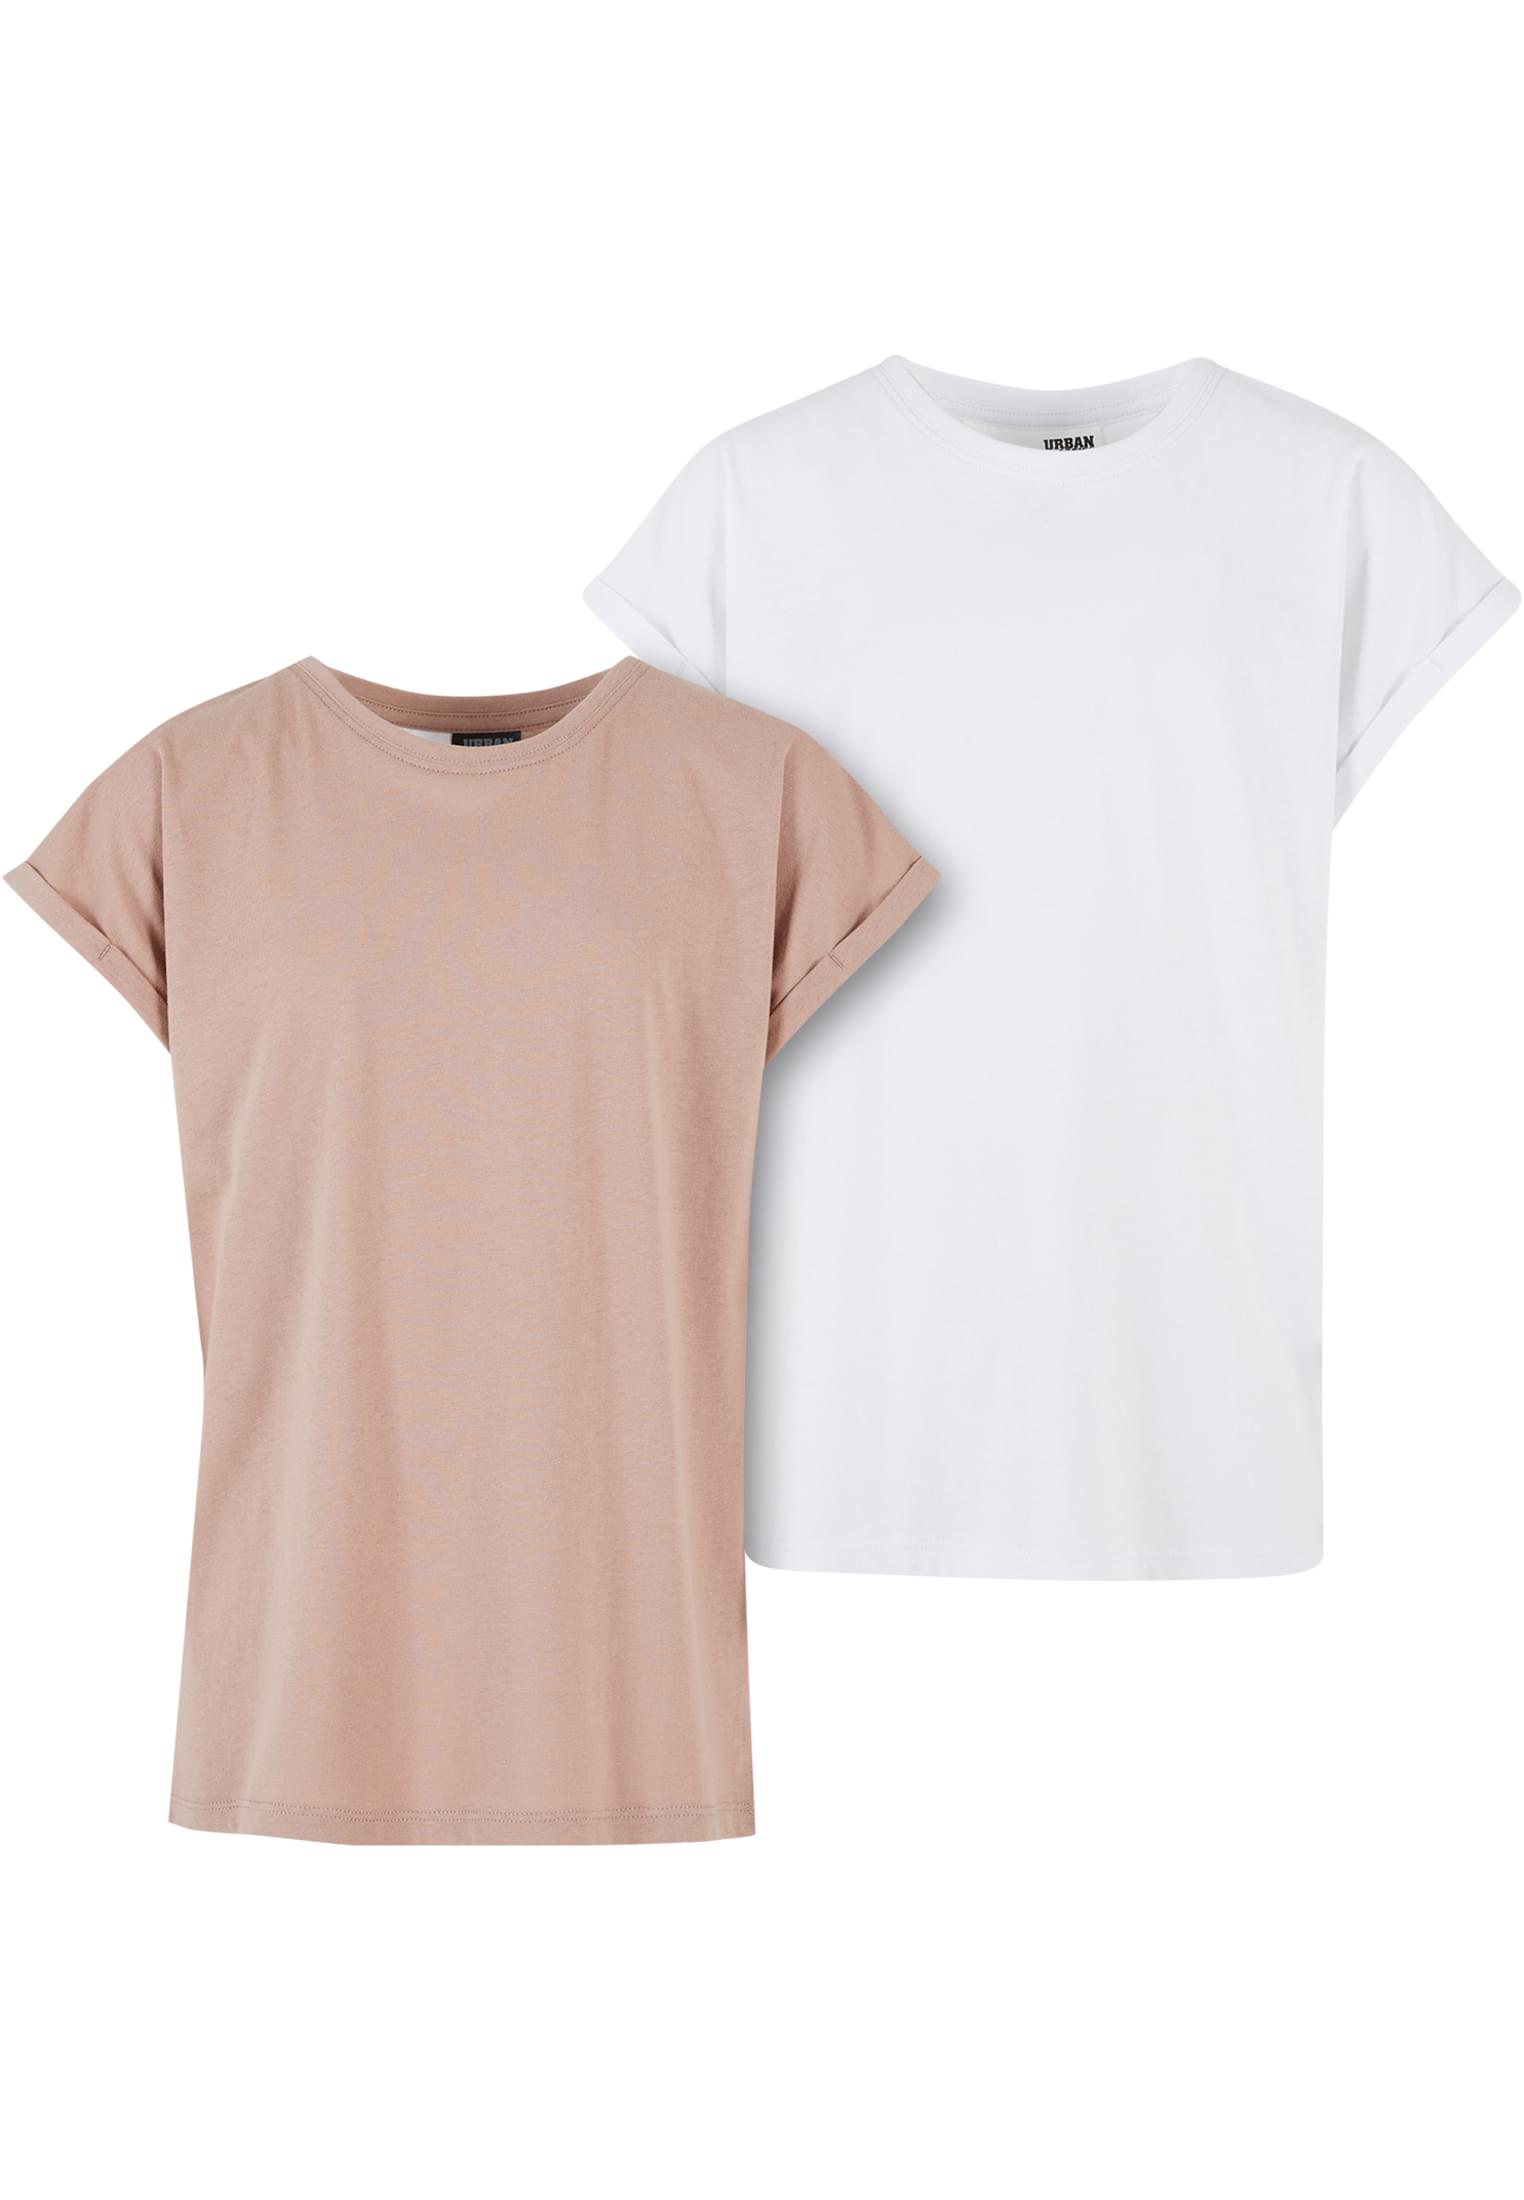 Girls' Extended Shoulder Tee T-Shirt - 2 Pack White+Pink